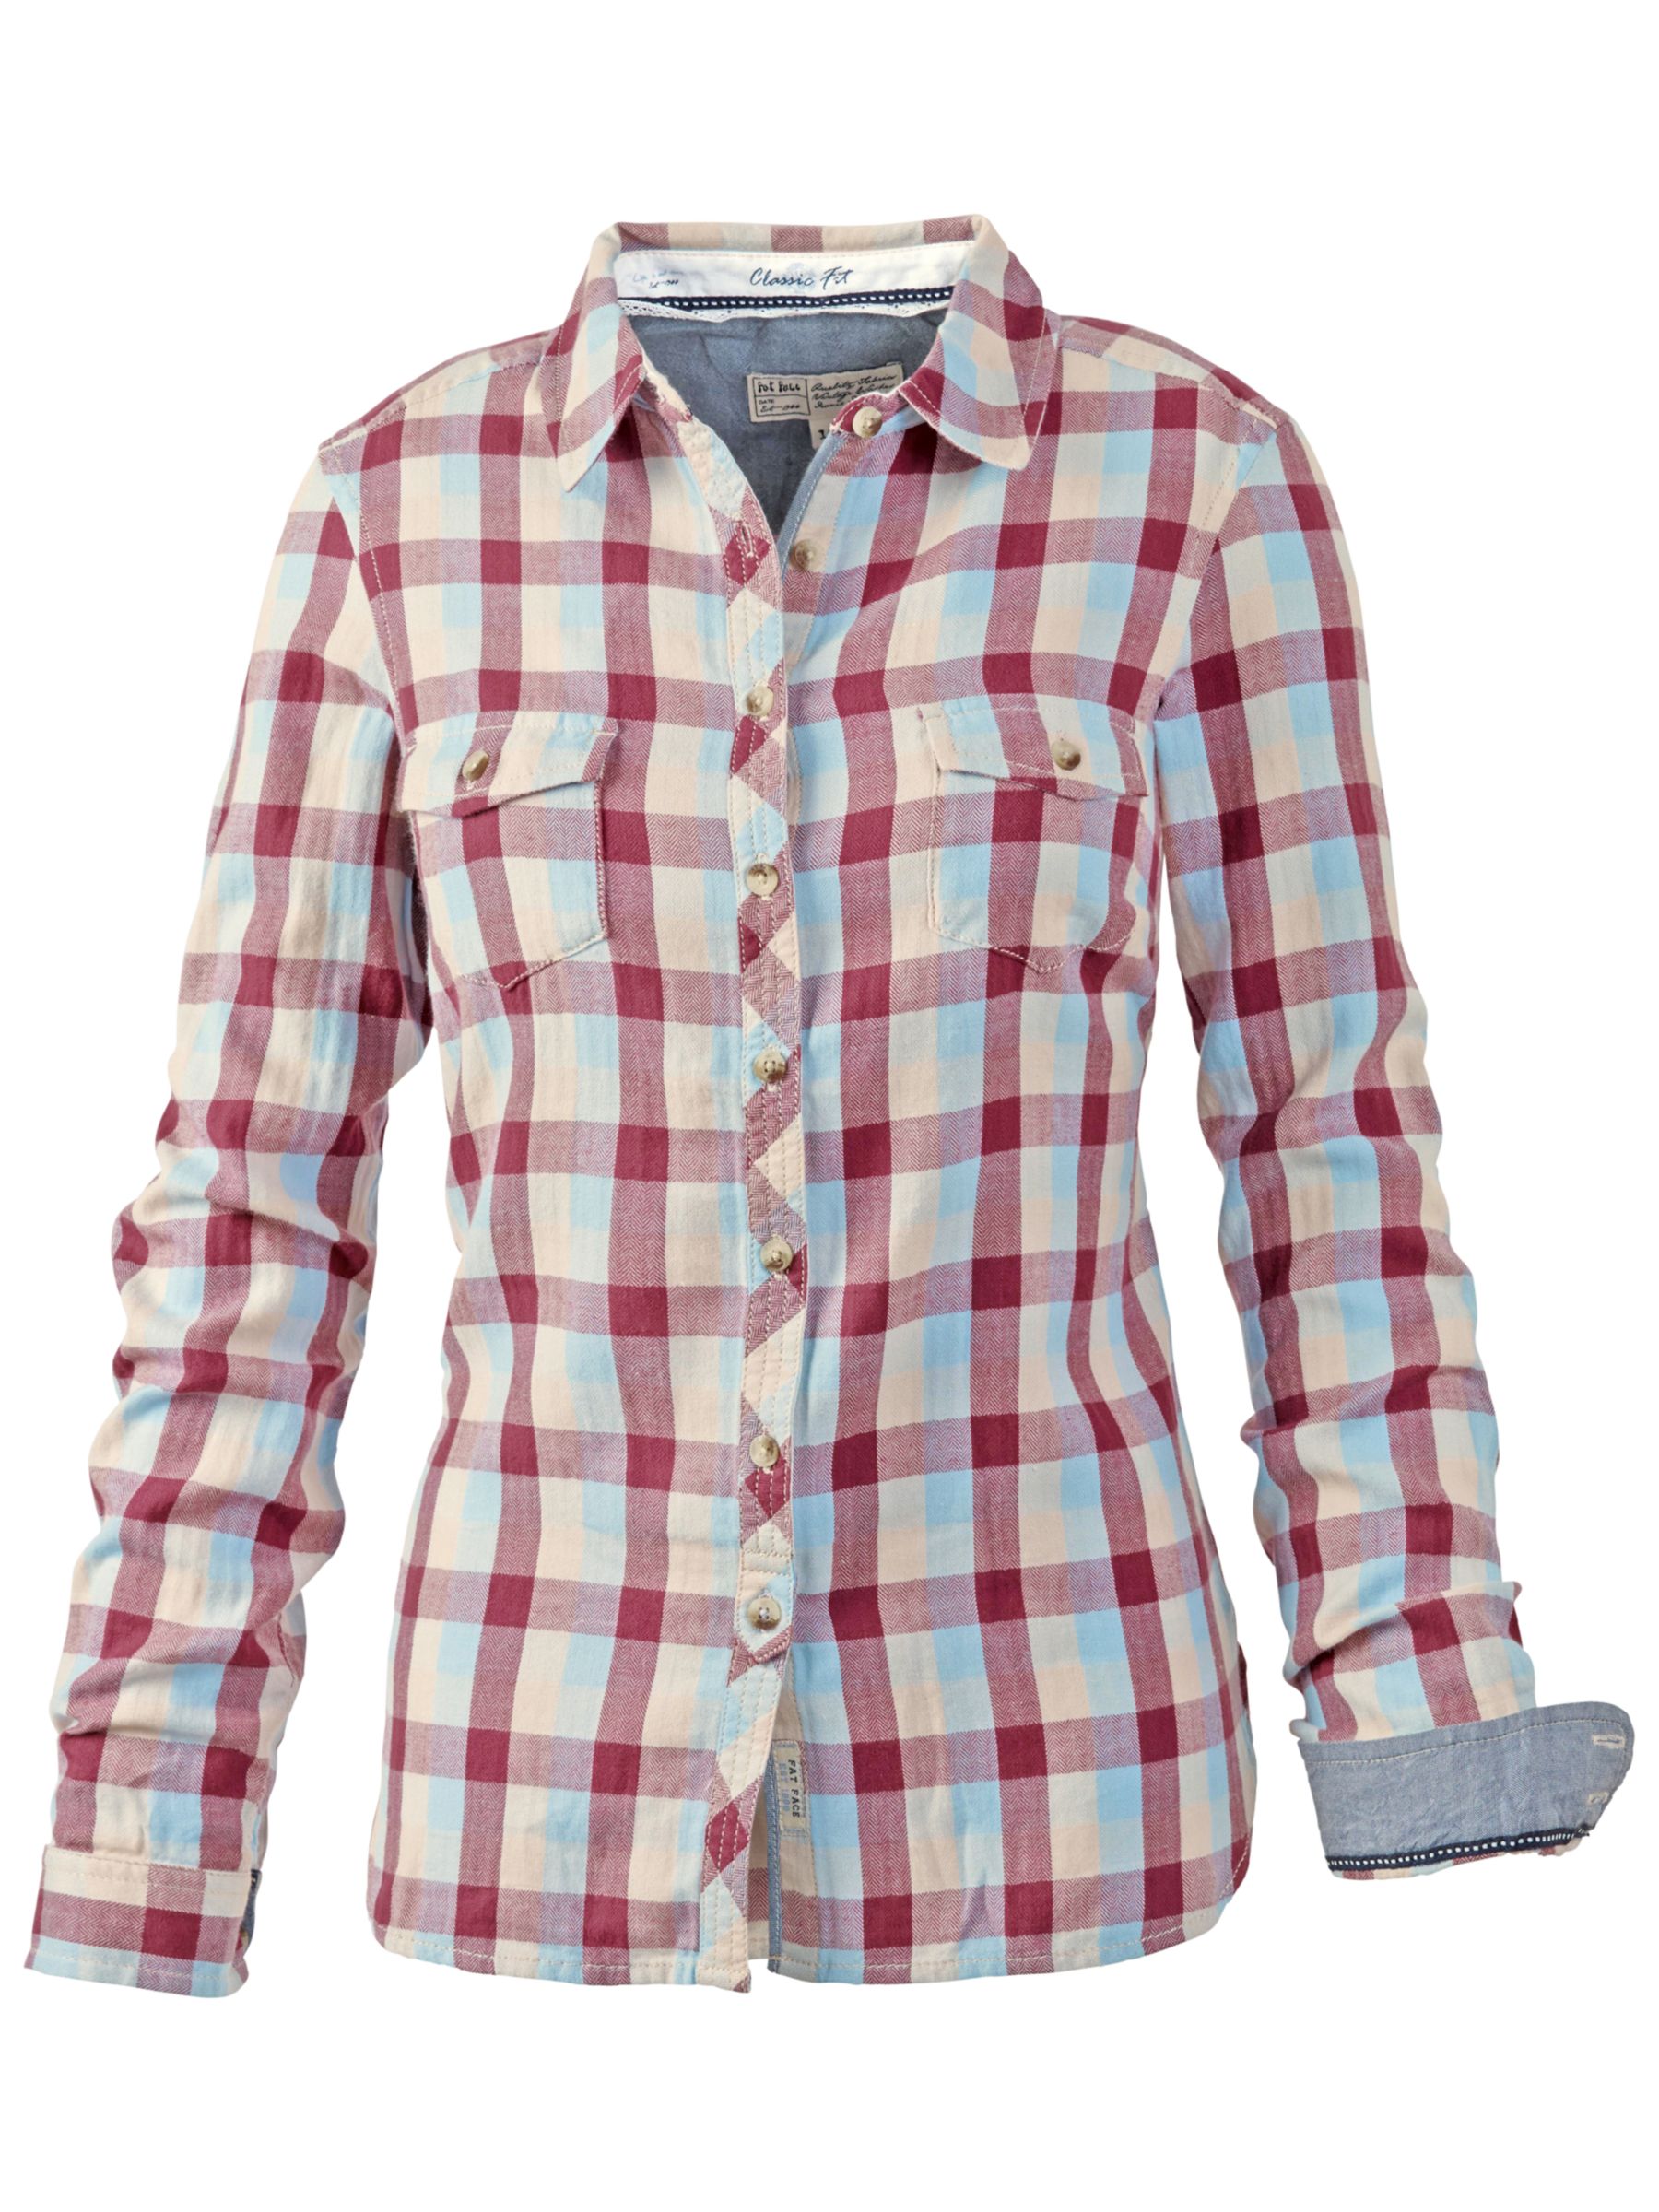 Buy Fat Face Classic Fit Check Shirt, Rouge Online at johnlewis.com